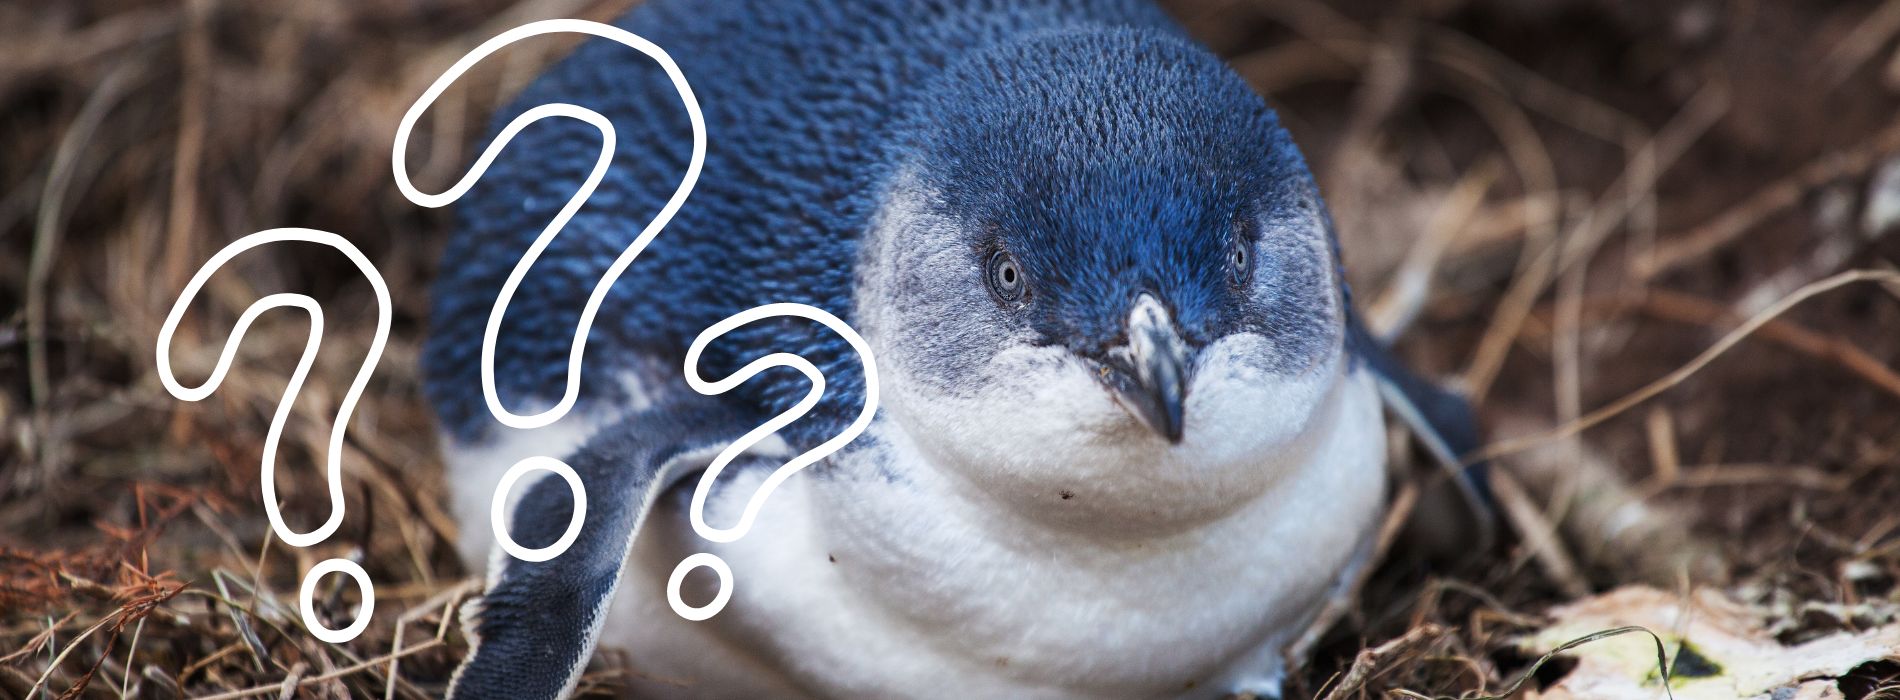 How many syllables in penguin?